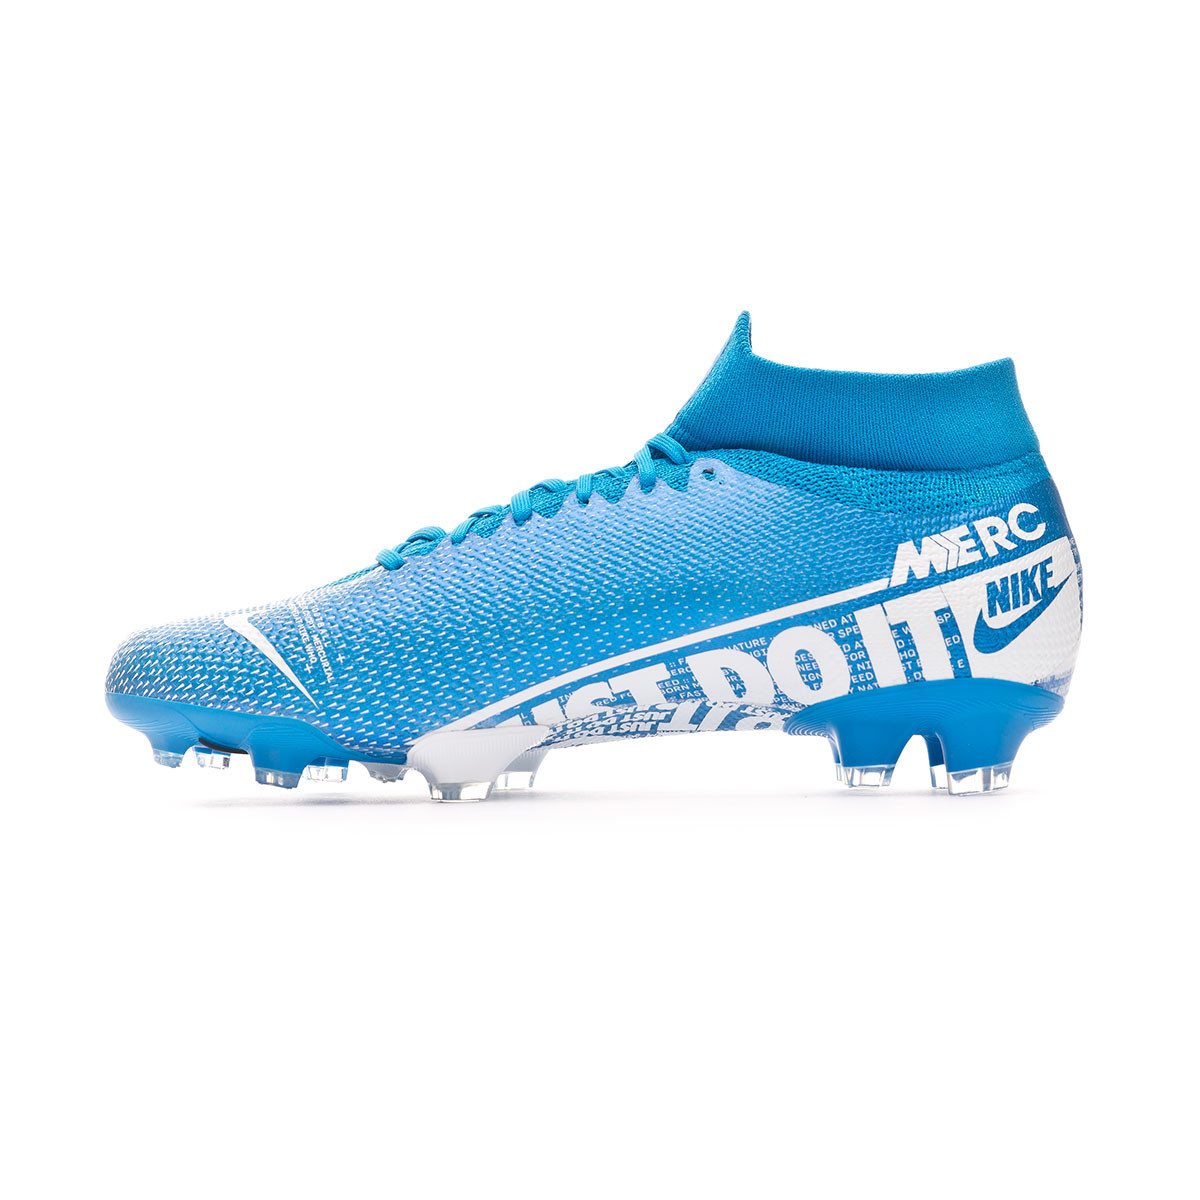 Nike Mercurial Superfly 7 Academy SG PRO AC New Lights.